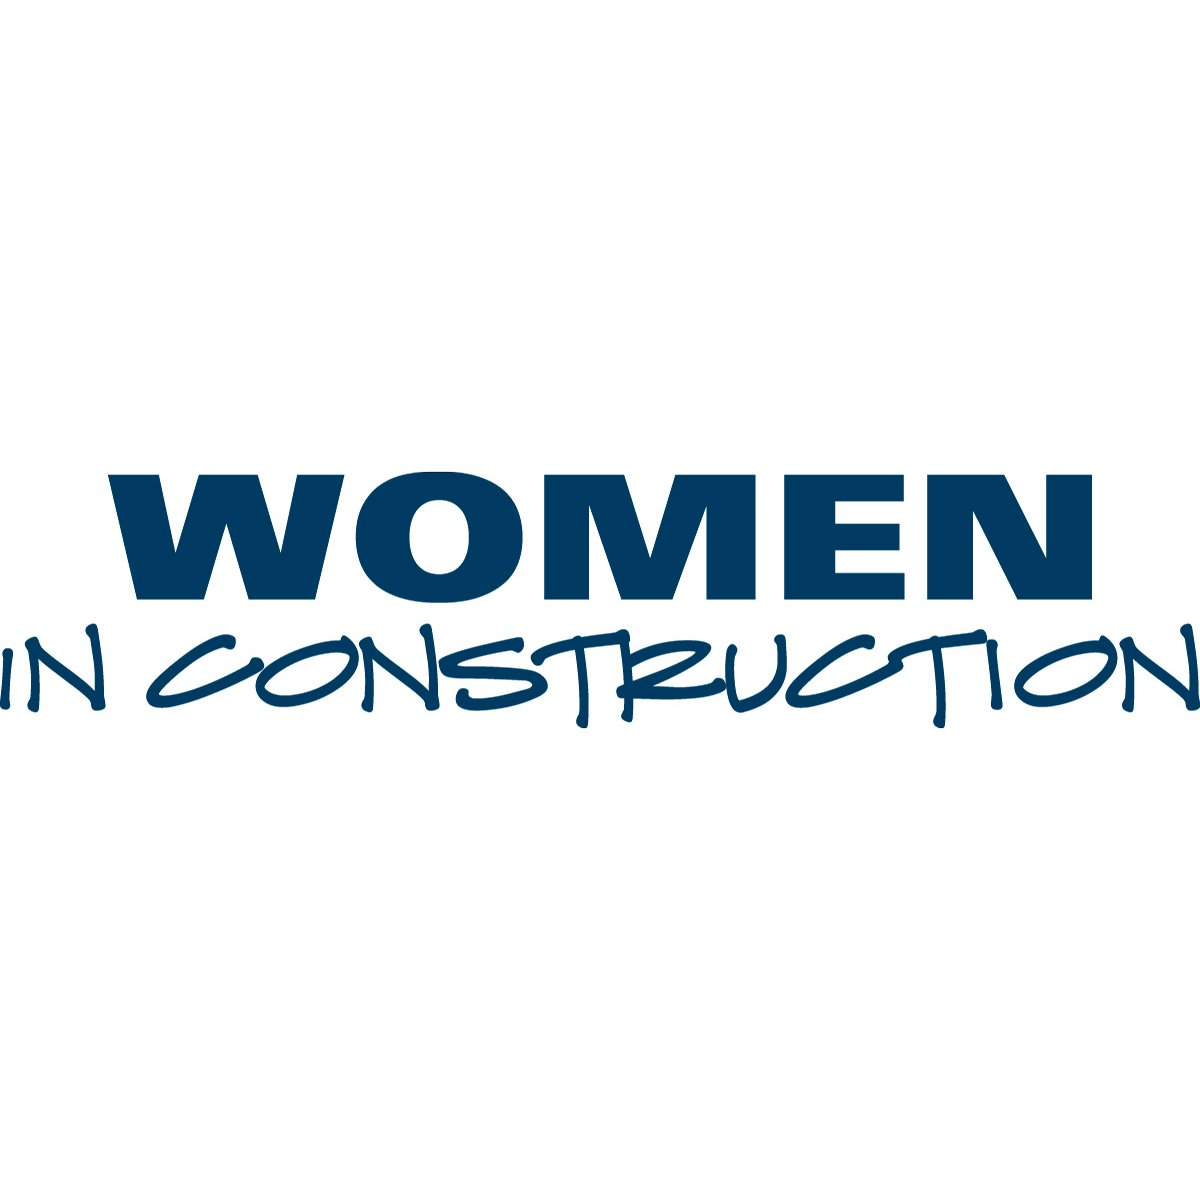 WIC is the East Coast’s premiere forum for education, professional development and networking for women in the construction industry